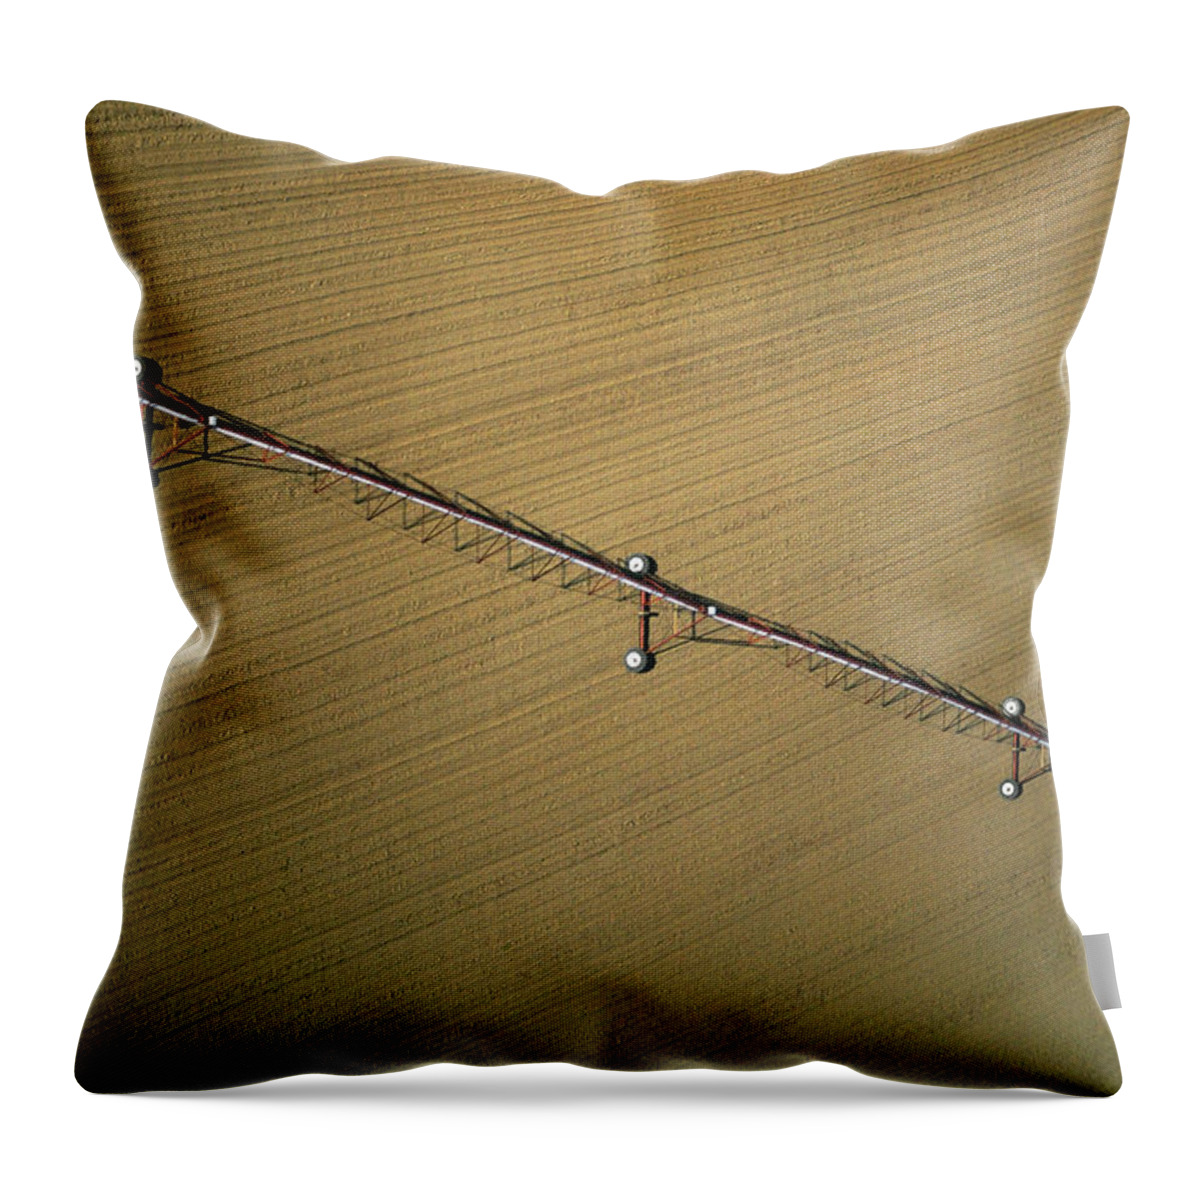 Dividing Throw Pillow featuring the photograph Irrigation Sprayer, Georgia by Glowimages